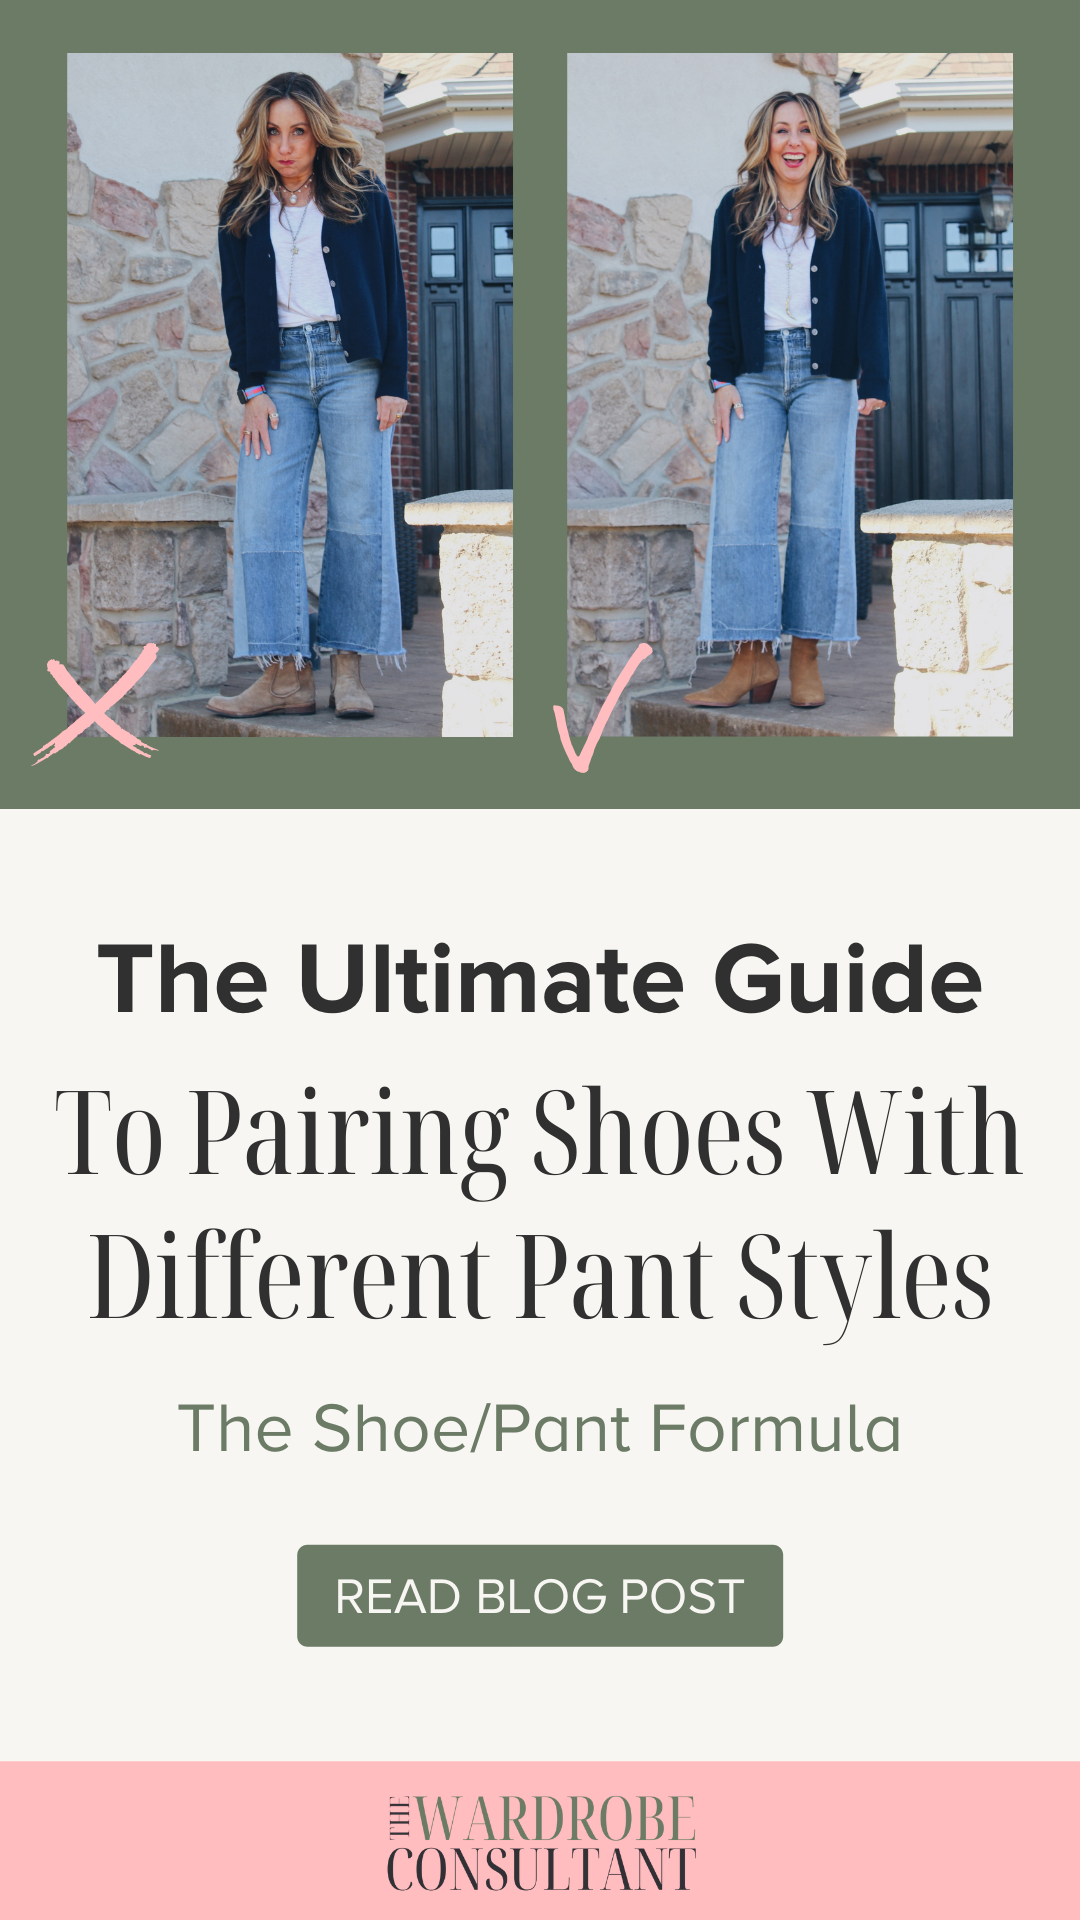 The Ultimate Guide To Pairing Shoes With Different Pant Styles